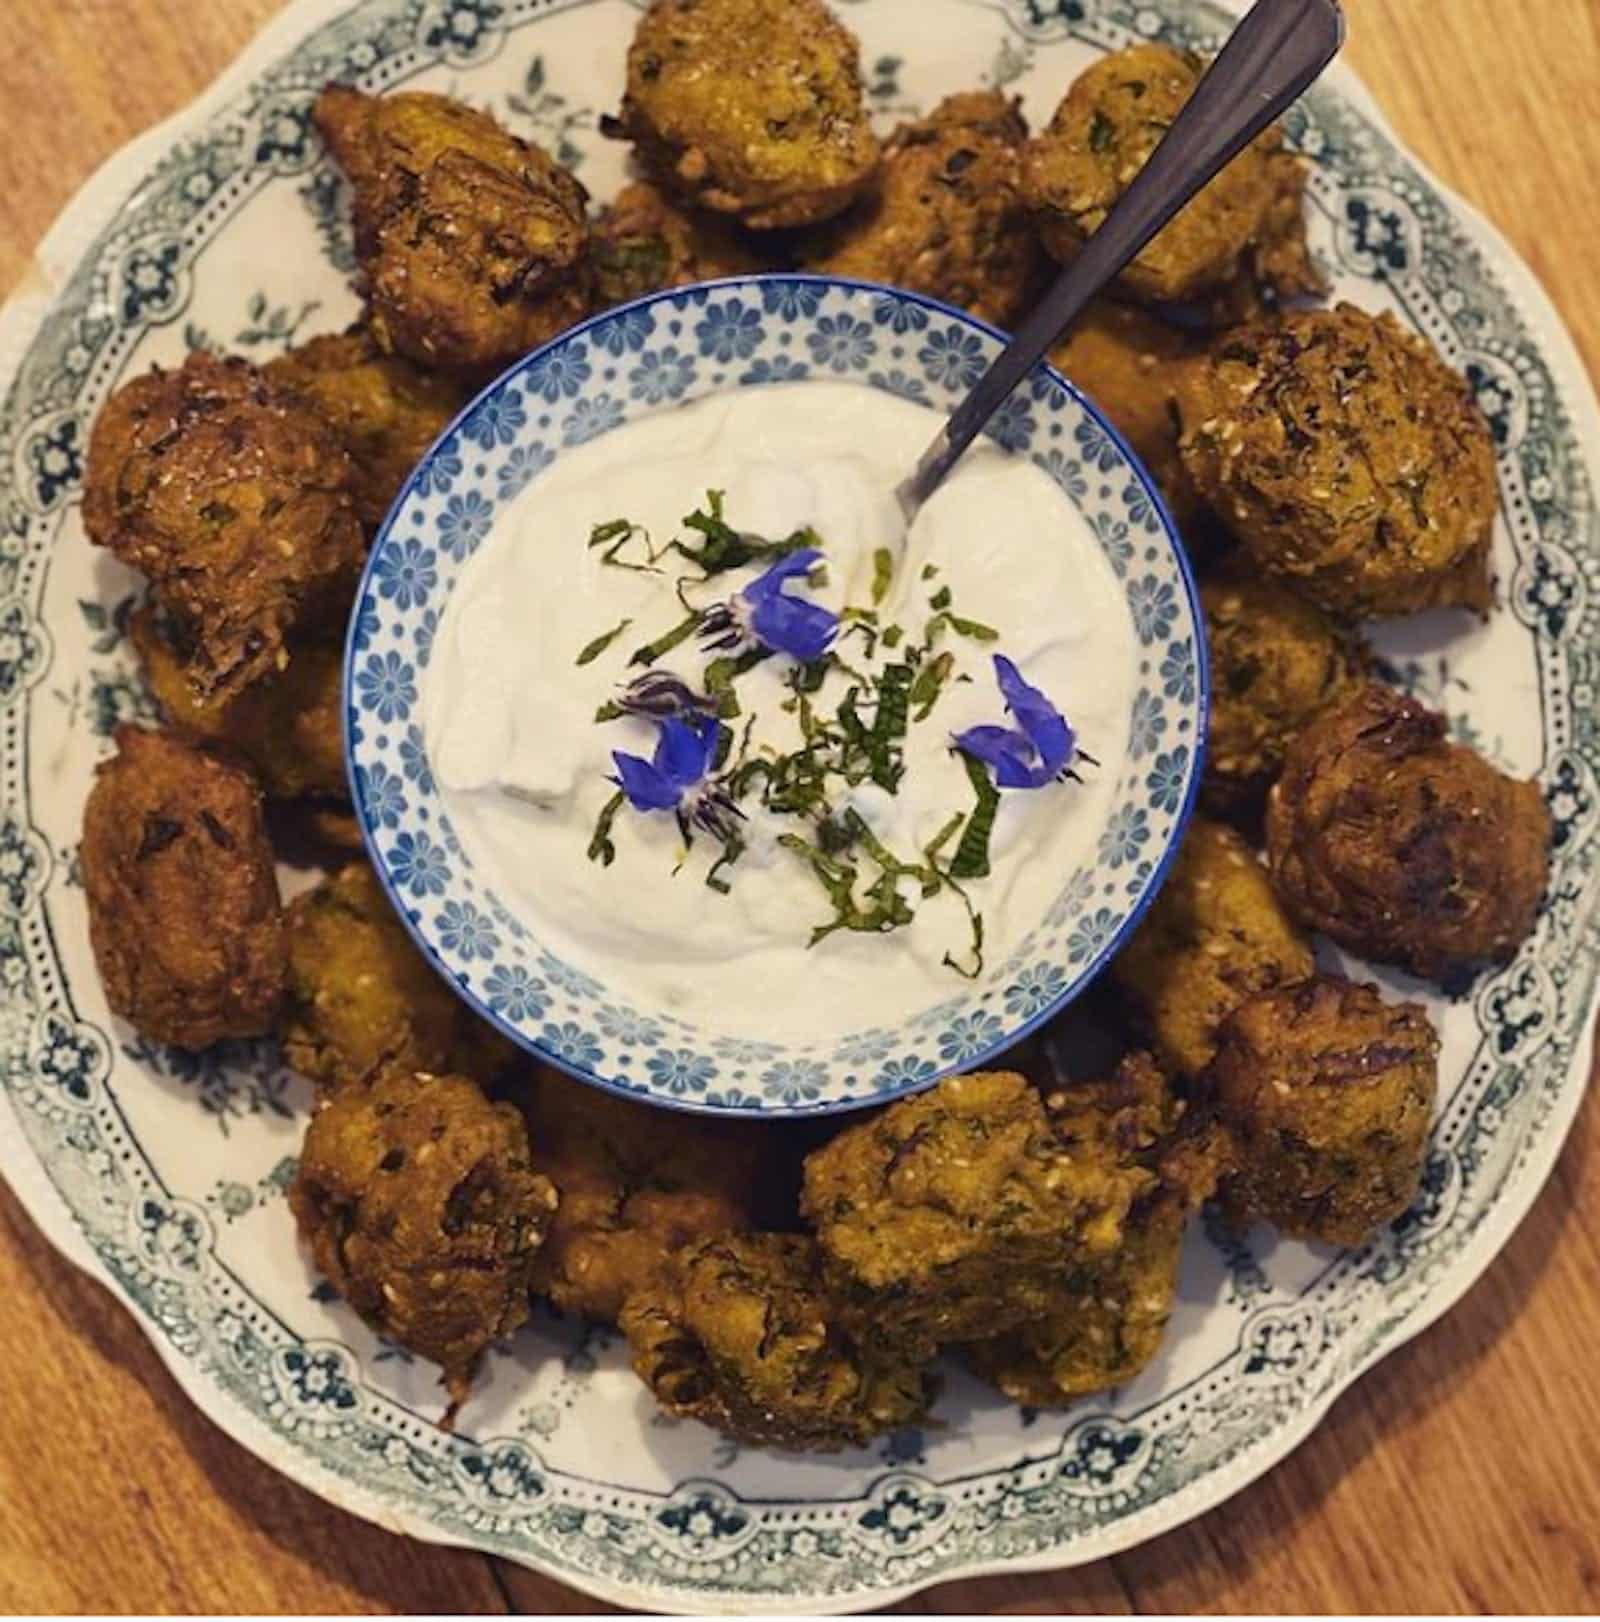 Vintage plate with fried fritters surrounding a blue bowl of  white paste with blue flowers